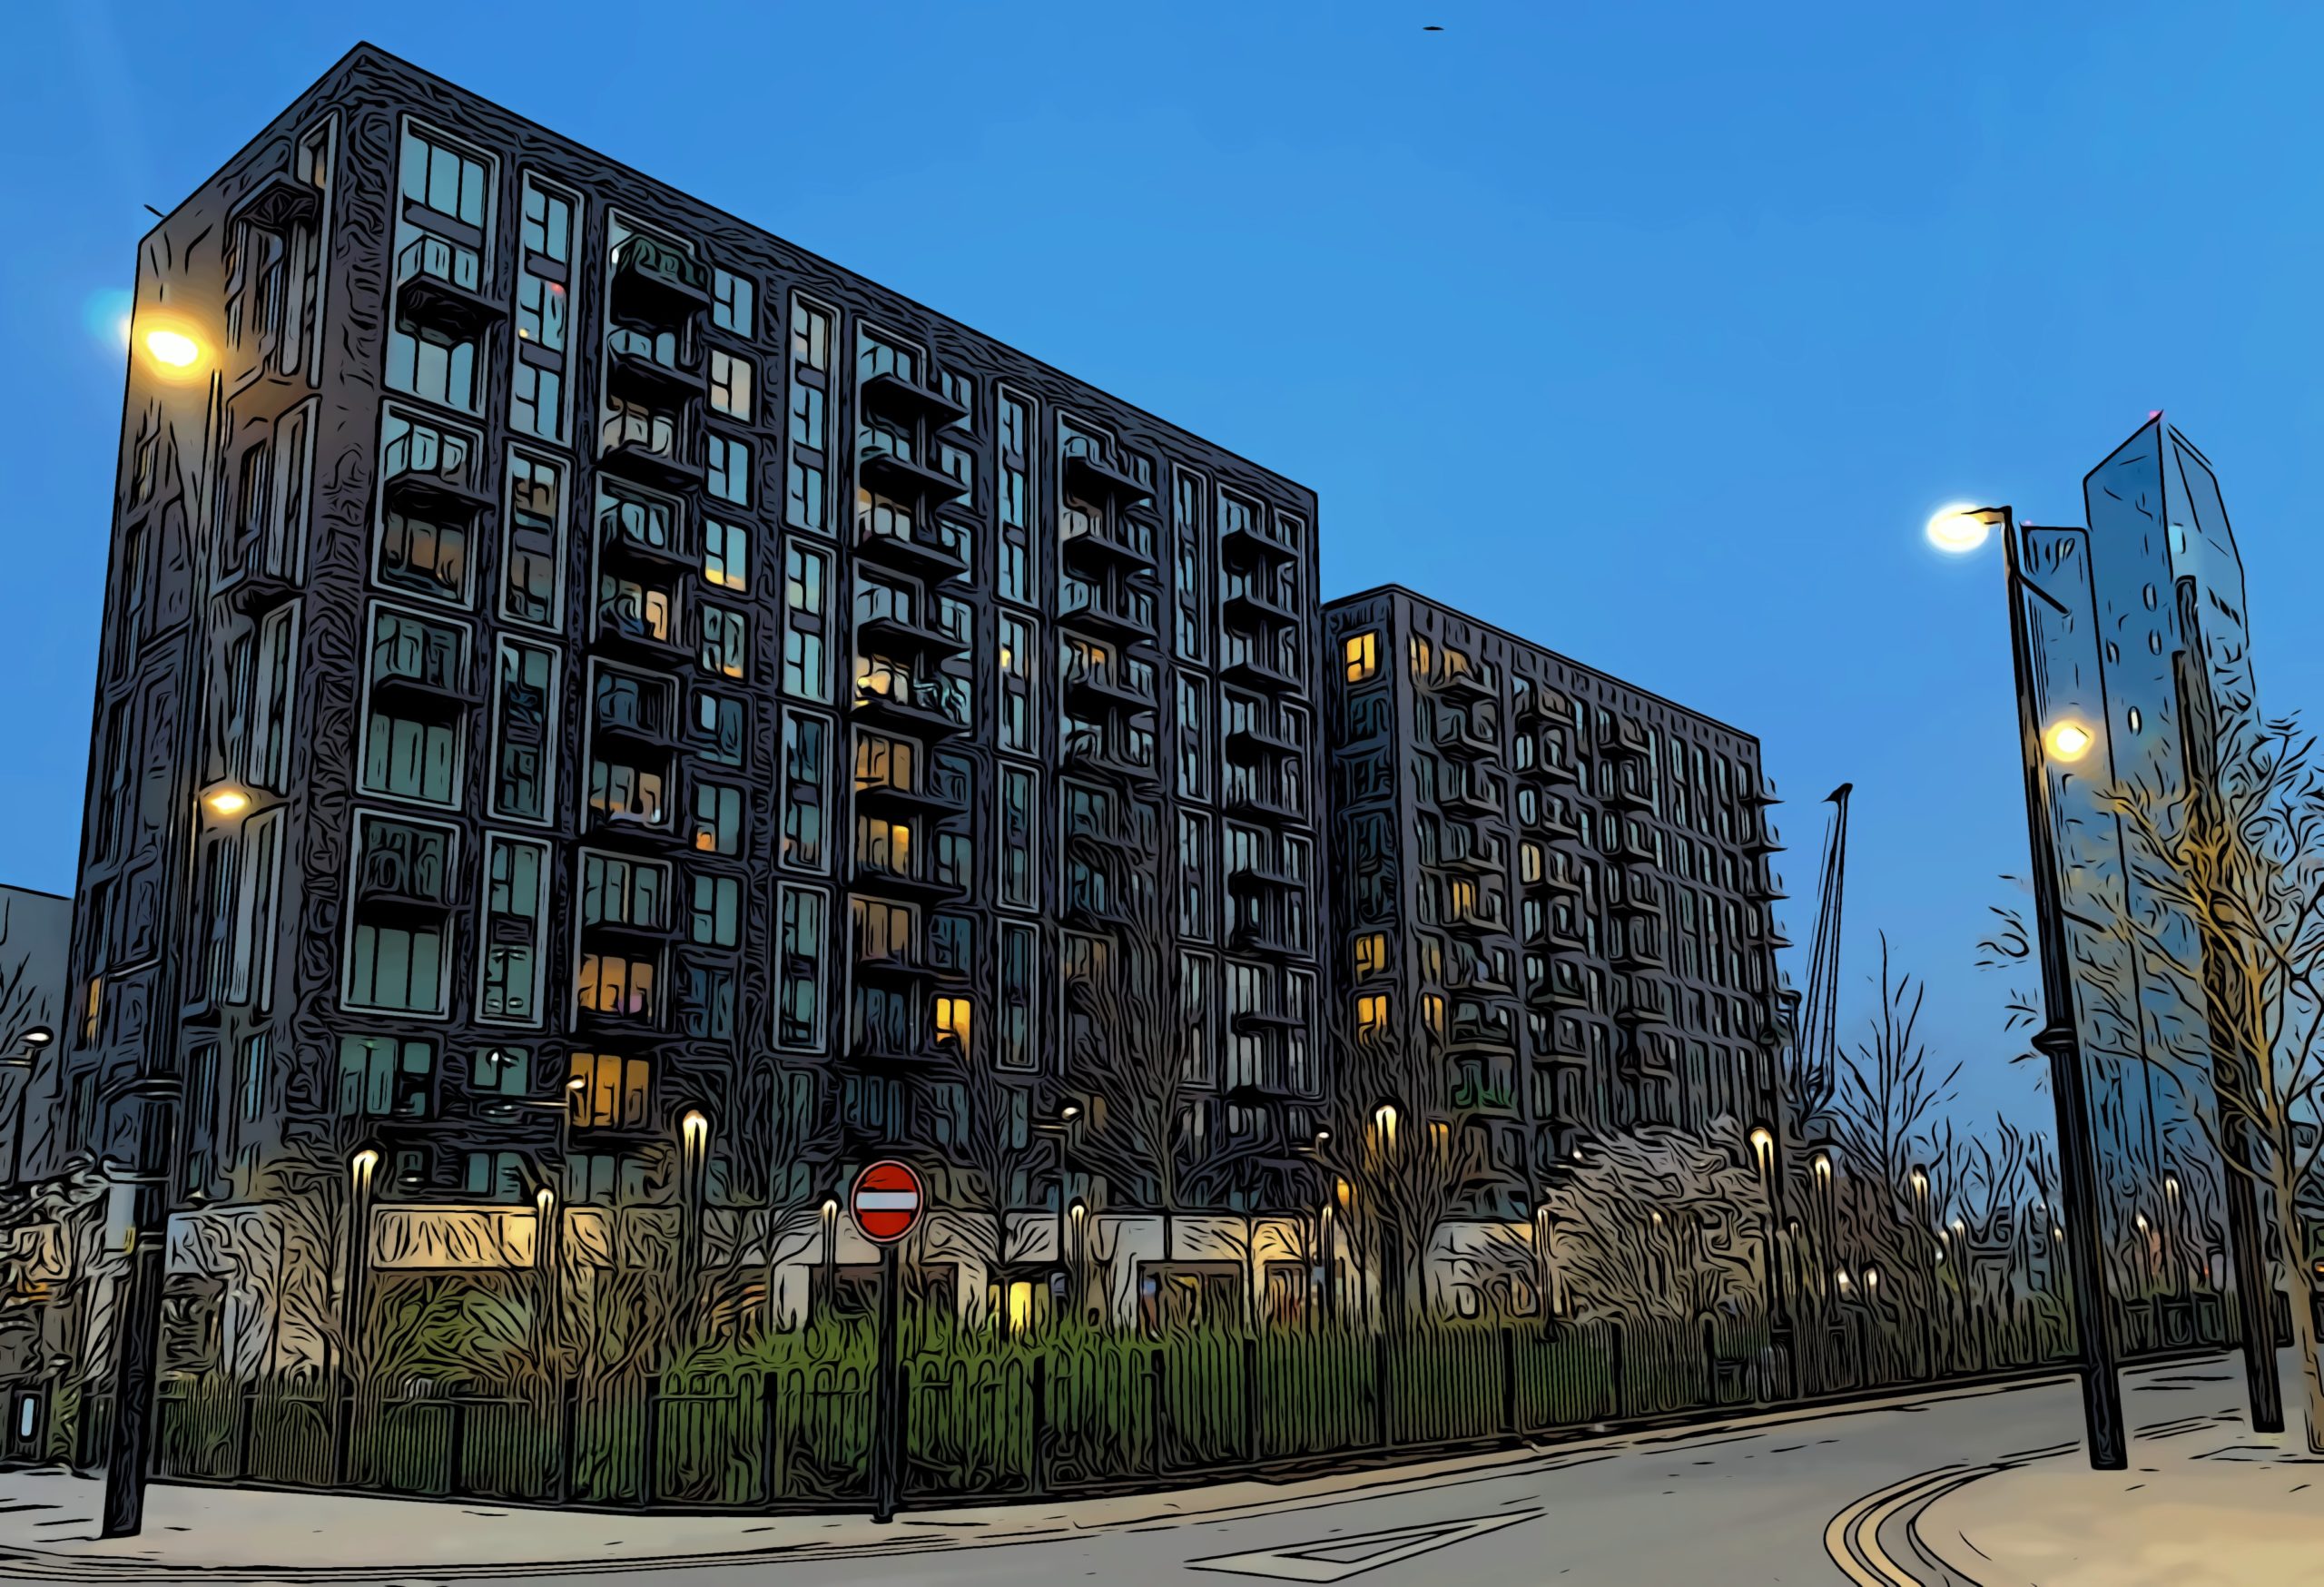 Harbord Square Park, Wood Wharf’s affordable homes, and glass tower Dollar Bay